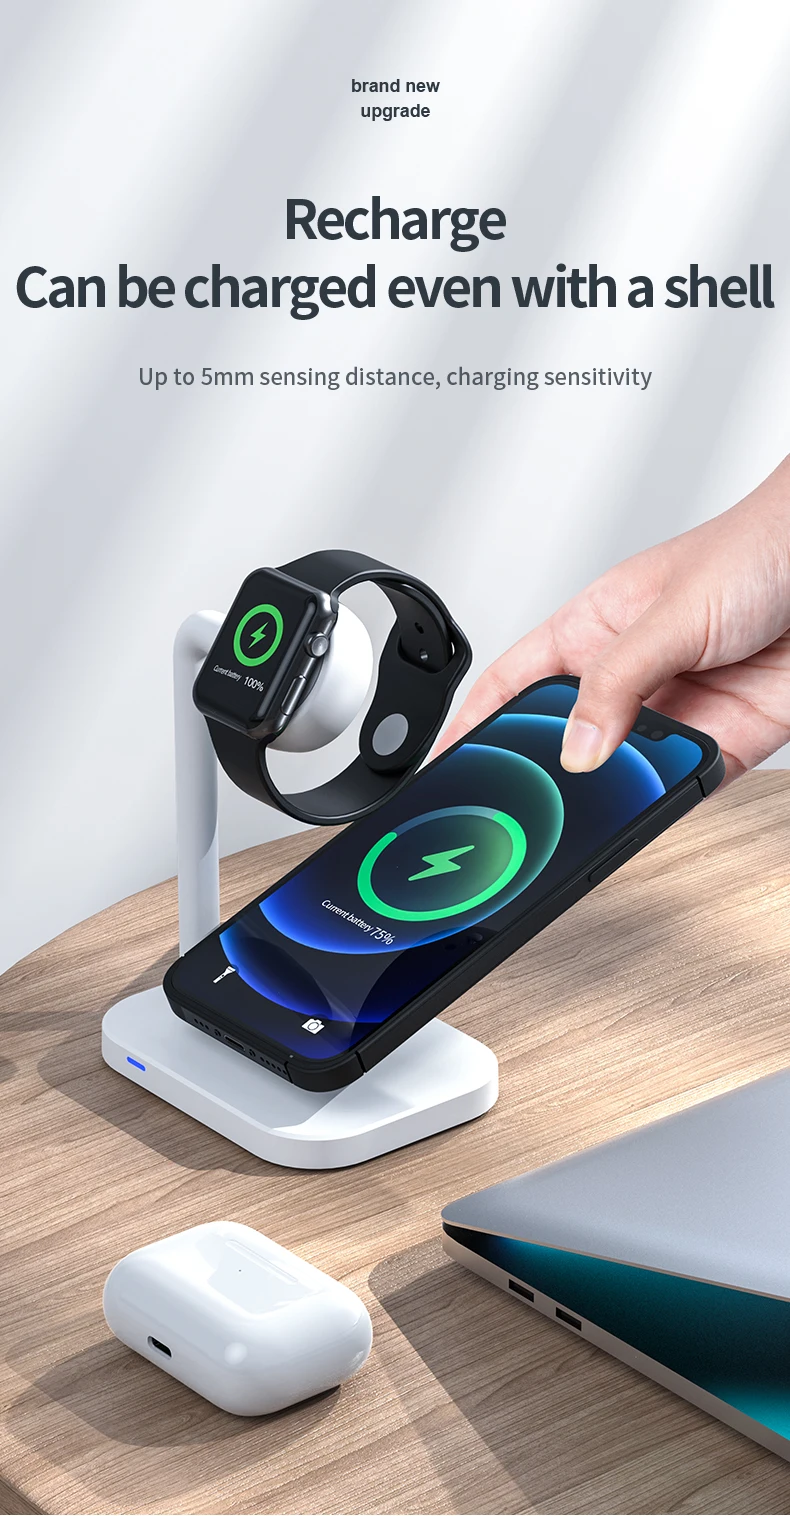 2 In 1 Magnetic Wireless Charger 15W QI Fast Charging Brackets for IPhone Samsung Huawei Xiaomi Mobile Phone Charging Stand baseus 65w